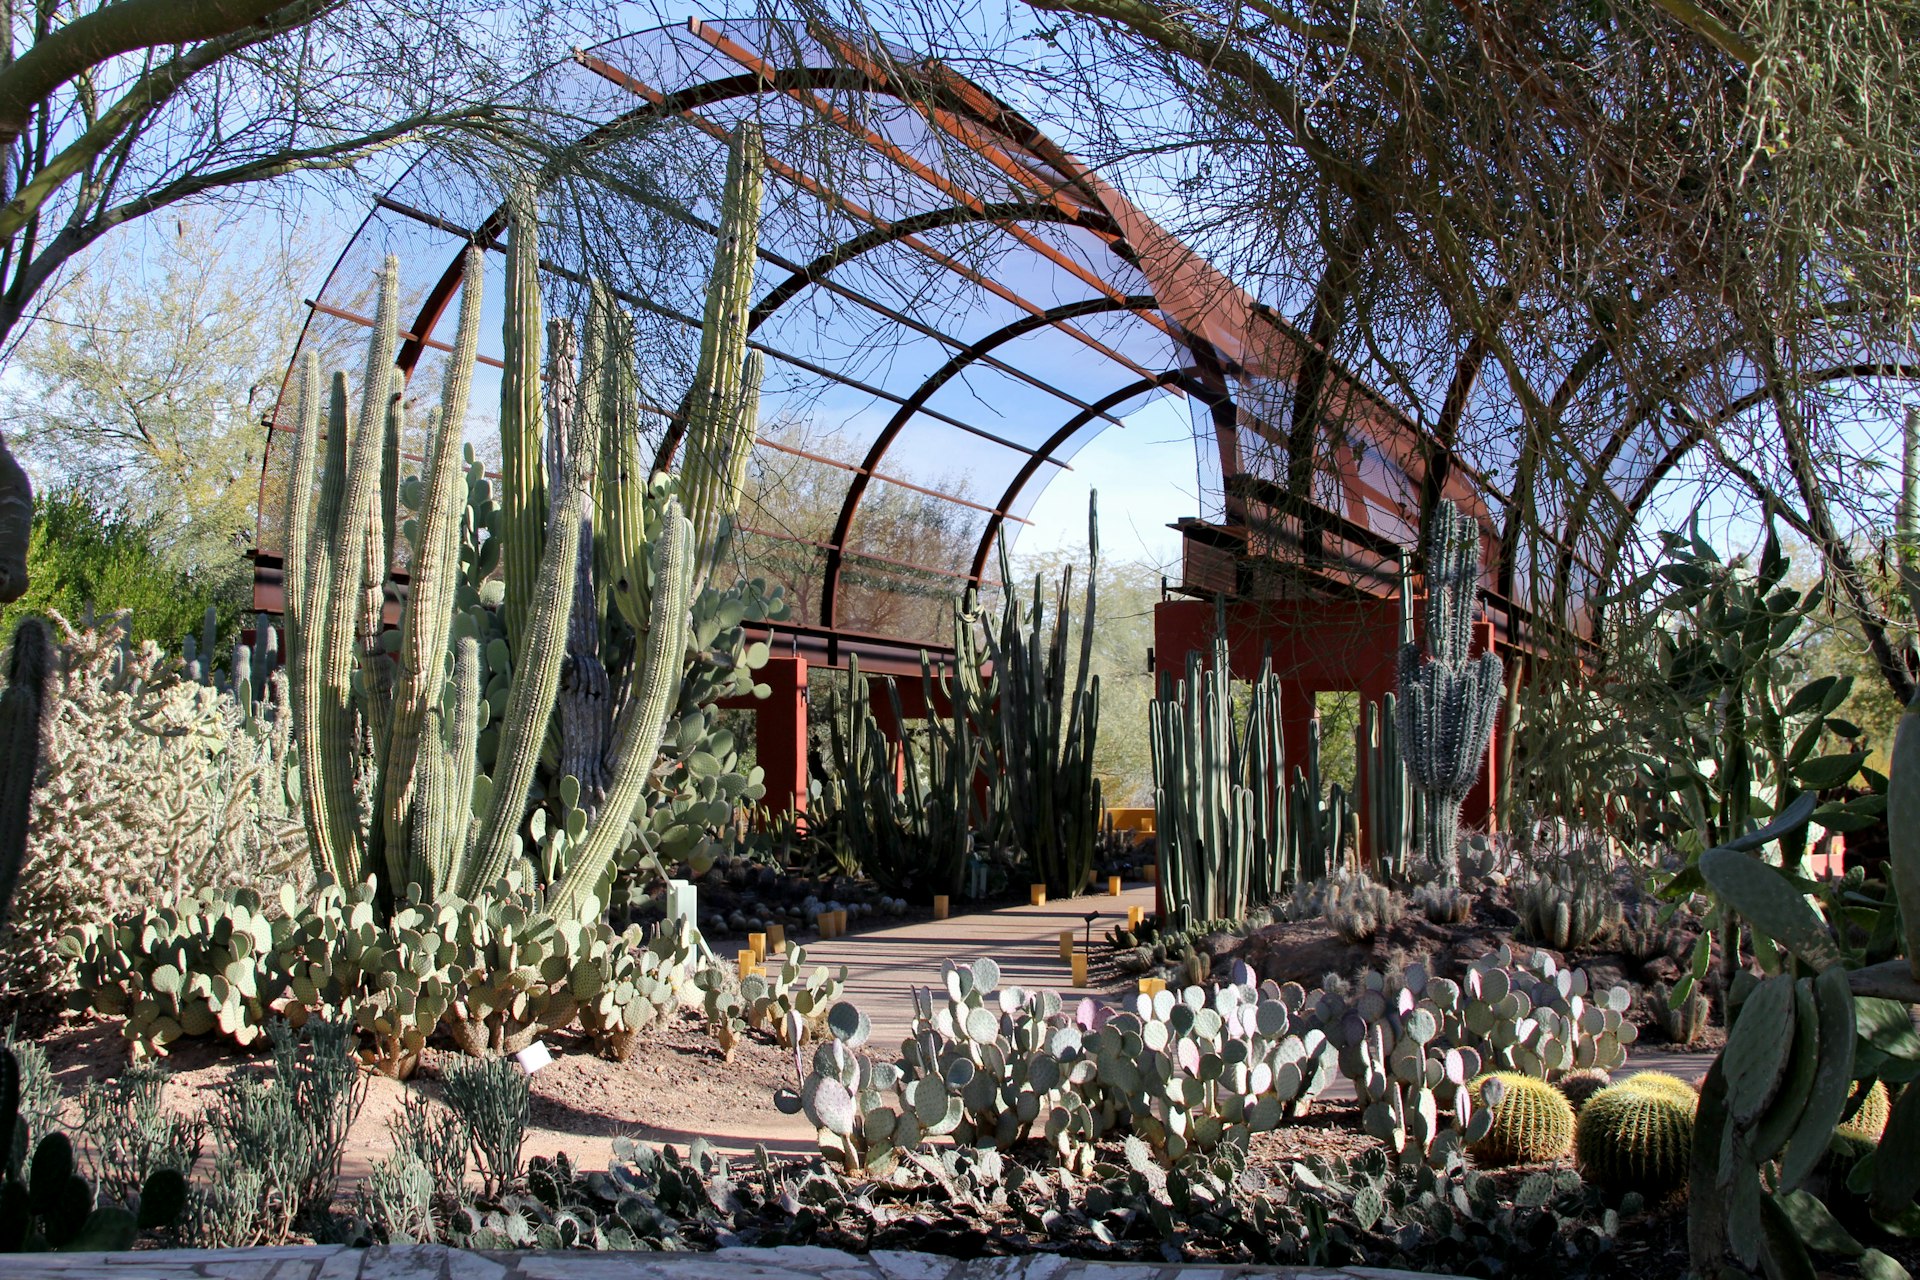 Different cacti and other desert flora at the entrance to Desert Botanical Garden, Phoenix